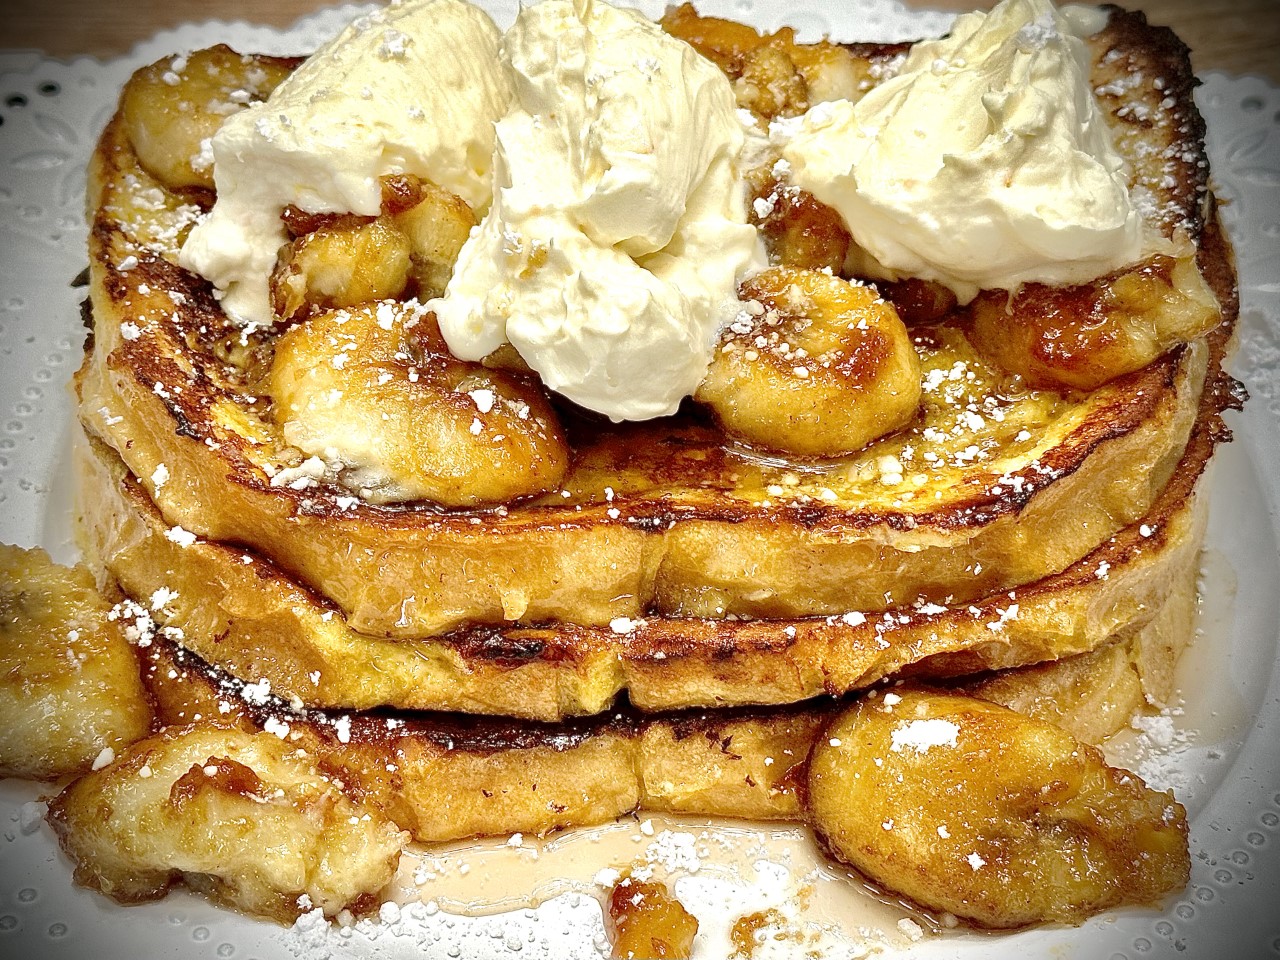 French Toast Bananas Foster style with Caramalized Bananas and Whipped Orange Cream Cheese